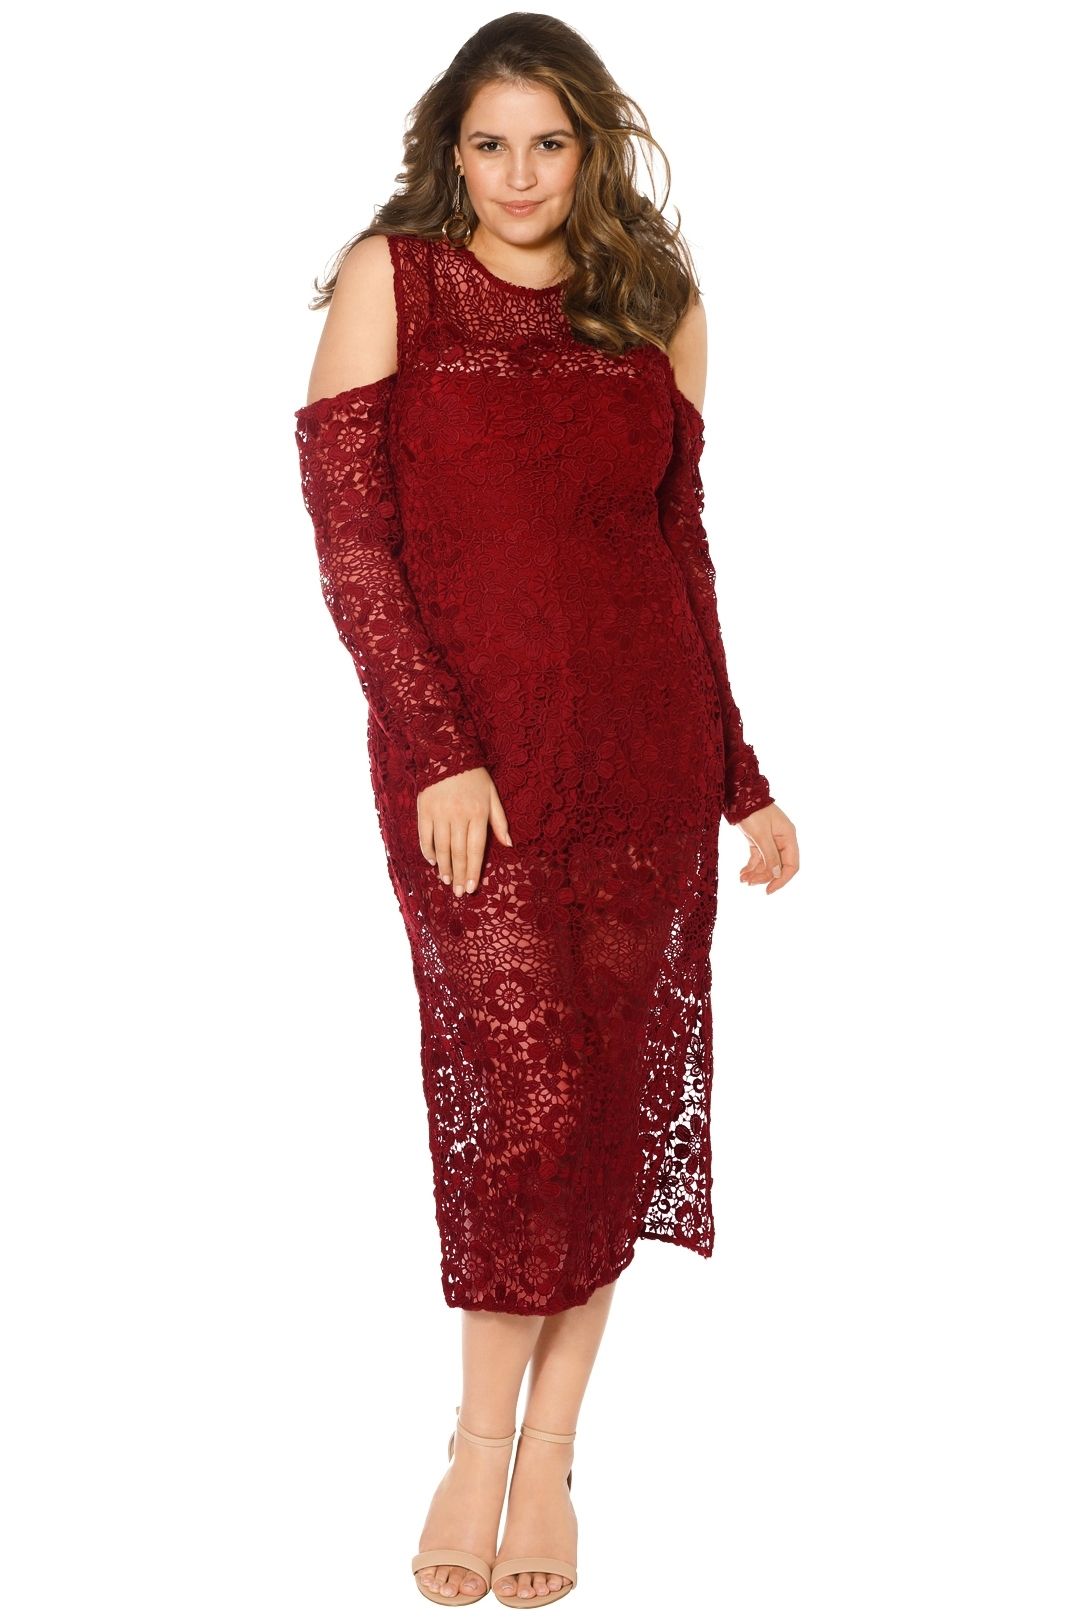 Keepsake The Label - Reach Out LS Midi Dress - Plum - Wine Red - Front 